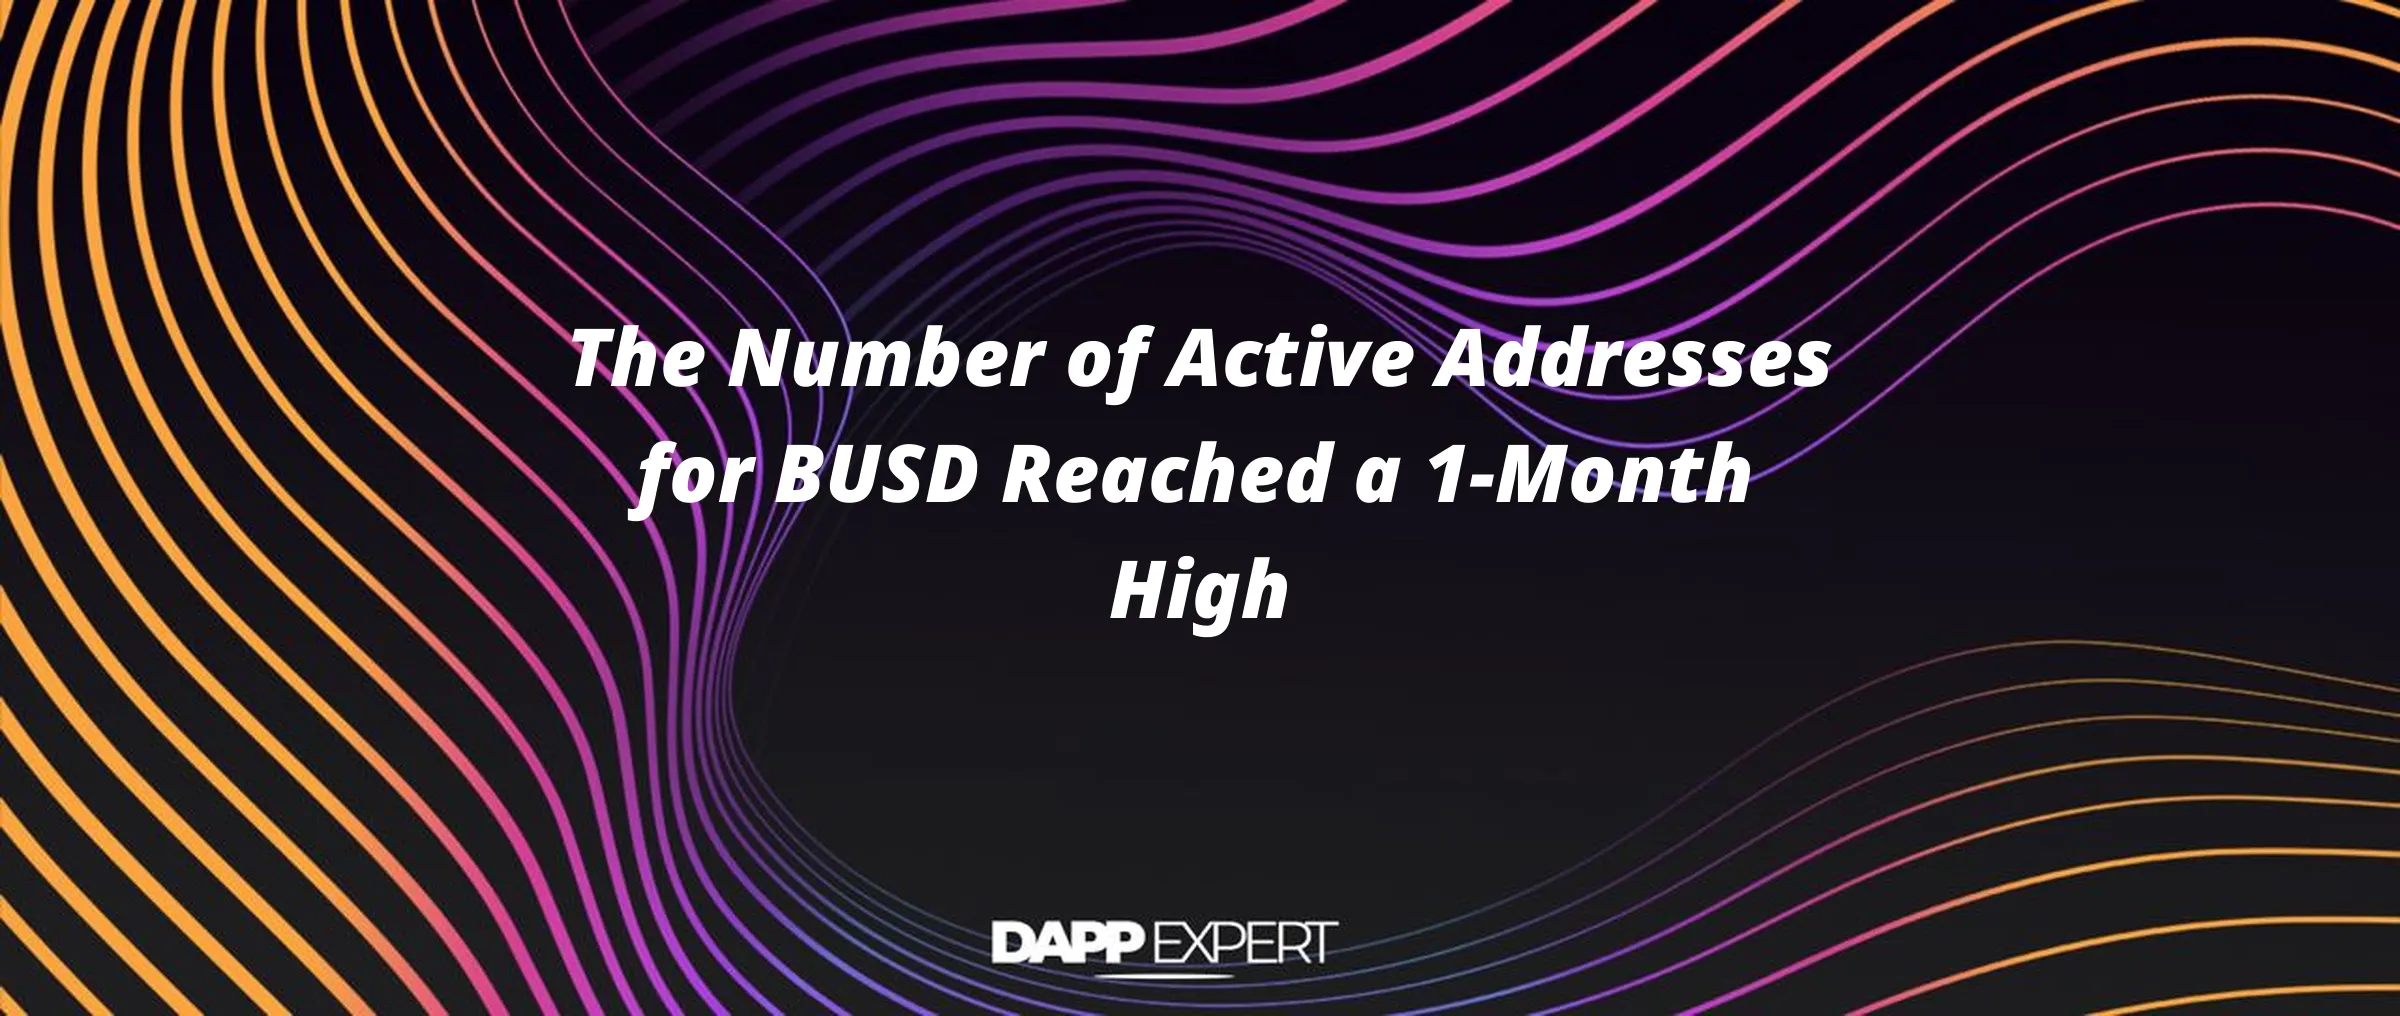 The Number of Active Addresses for BUSD Reached a 1-Month High